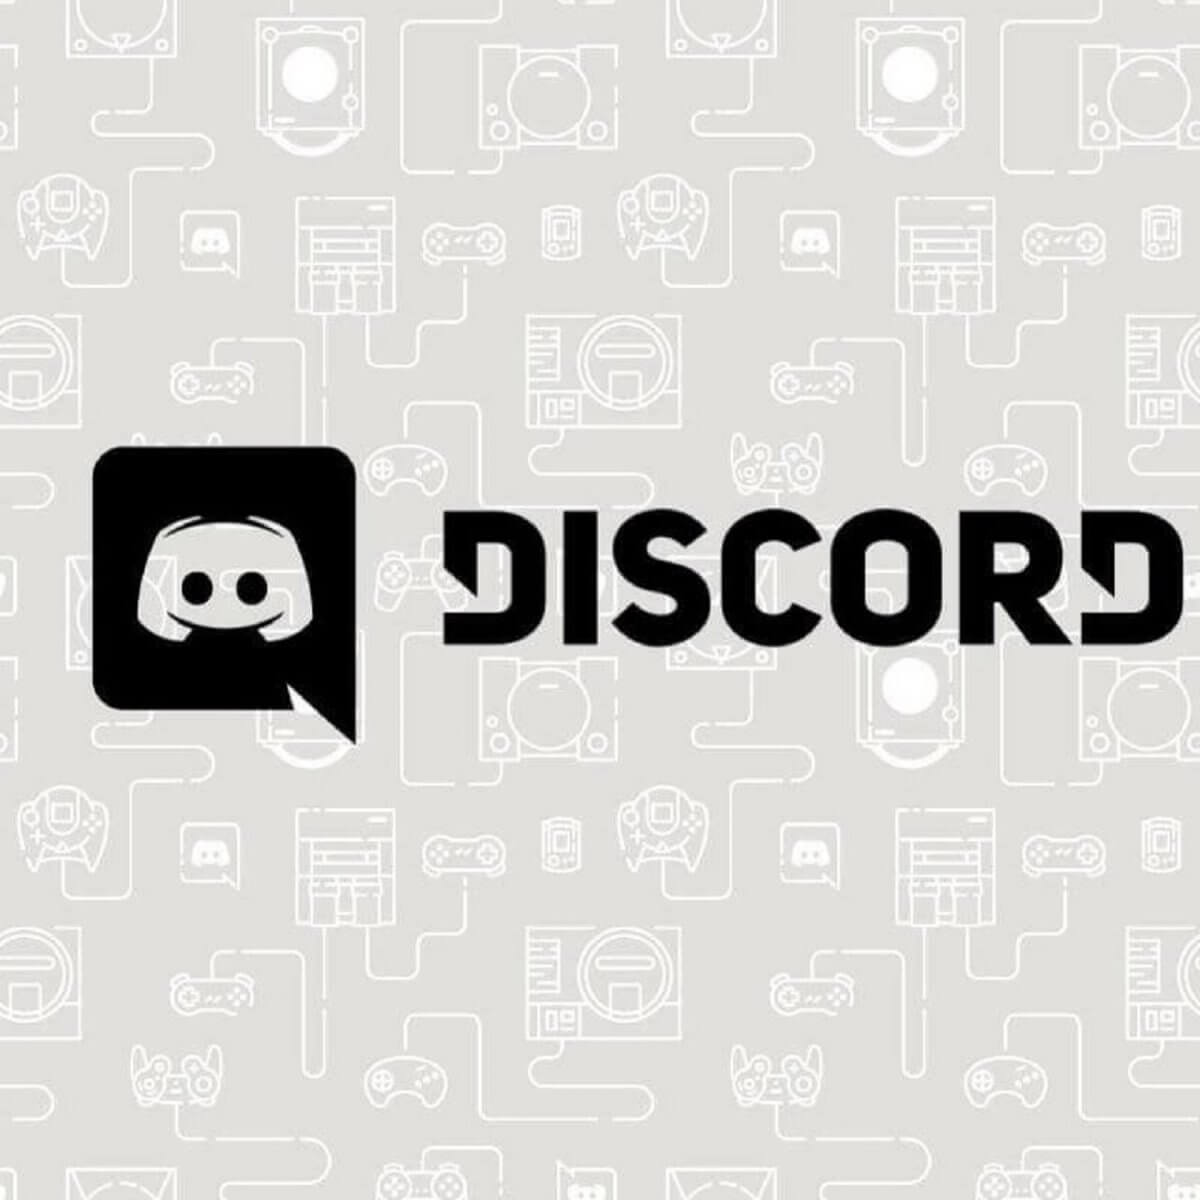 Discord Audio Keeps Cutting Out Try These Quick Methods